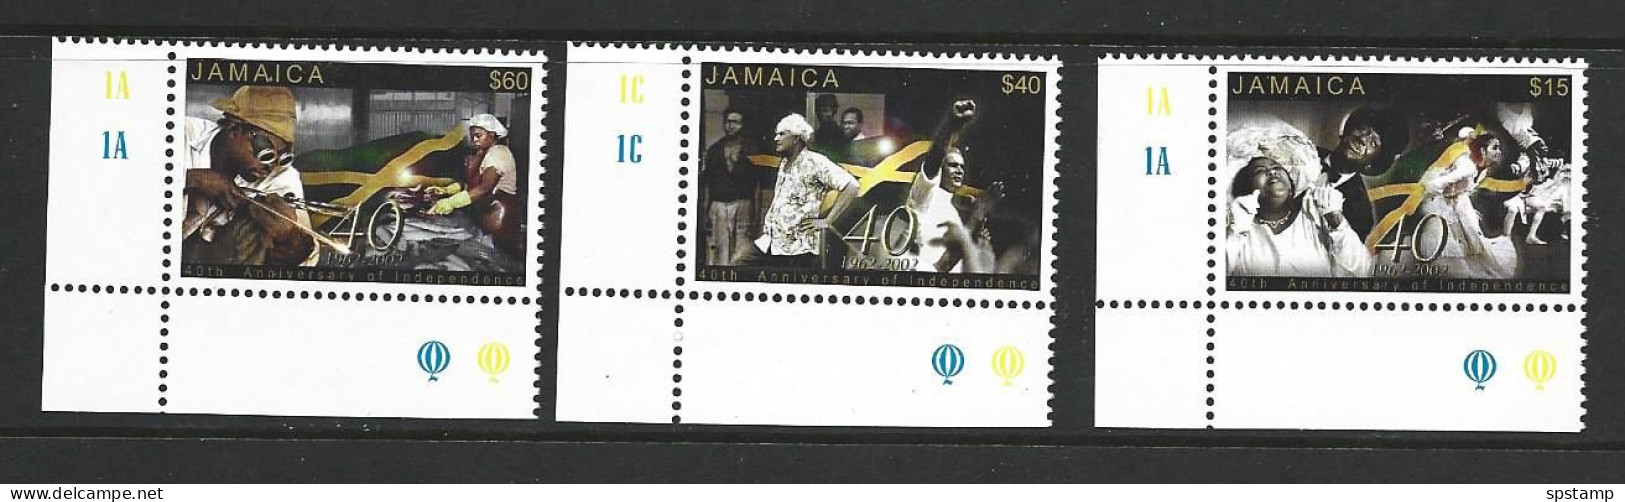 Jamaica 2002 Independence Anniversary Set Of 3 As Matched Marginal Singles With Plate Numbers MNH - Jamaica (1962-...)